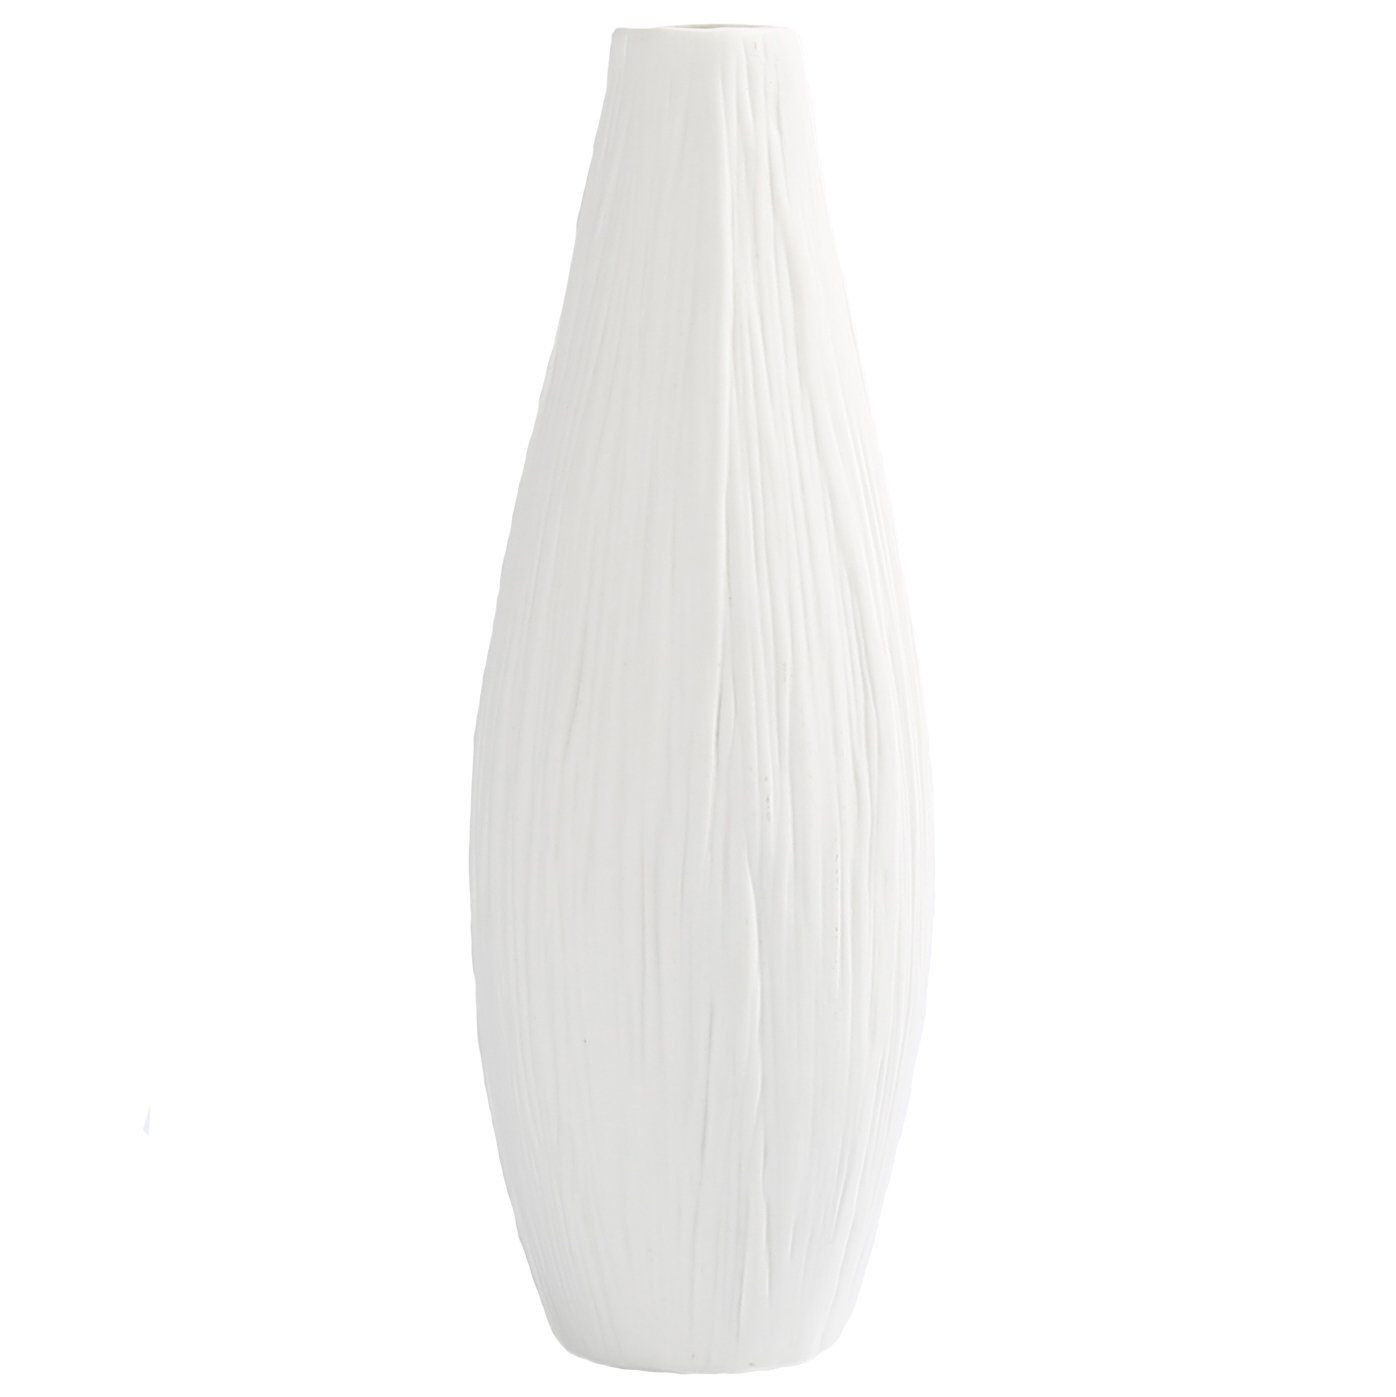 15 Nice White Vases for Sale 2022 free download white vases for sale of dvine dev 10 pure white ceramic flower vase tall oval intended for dvine dev 10 pure white ceramic flower vase tall oval